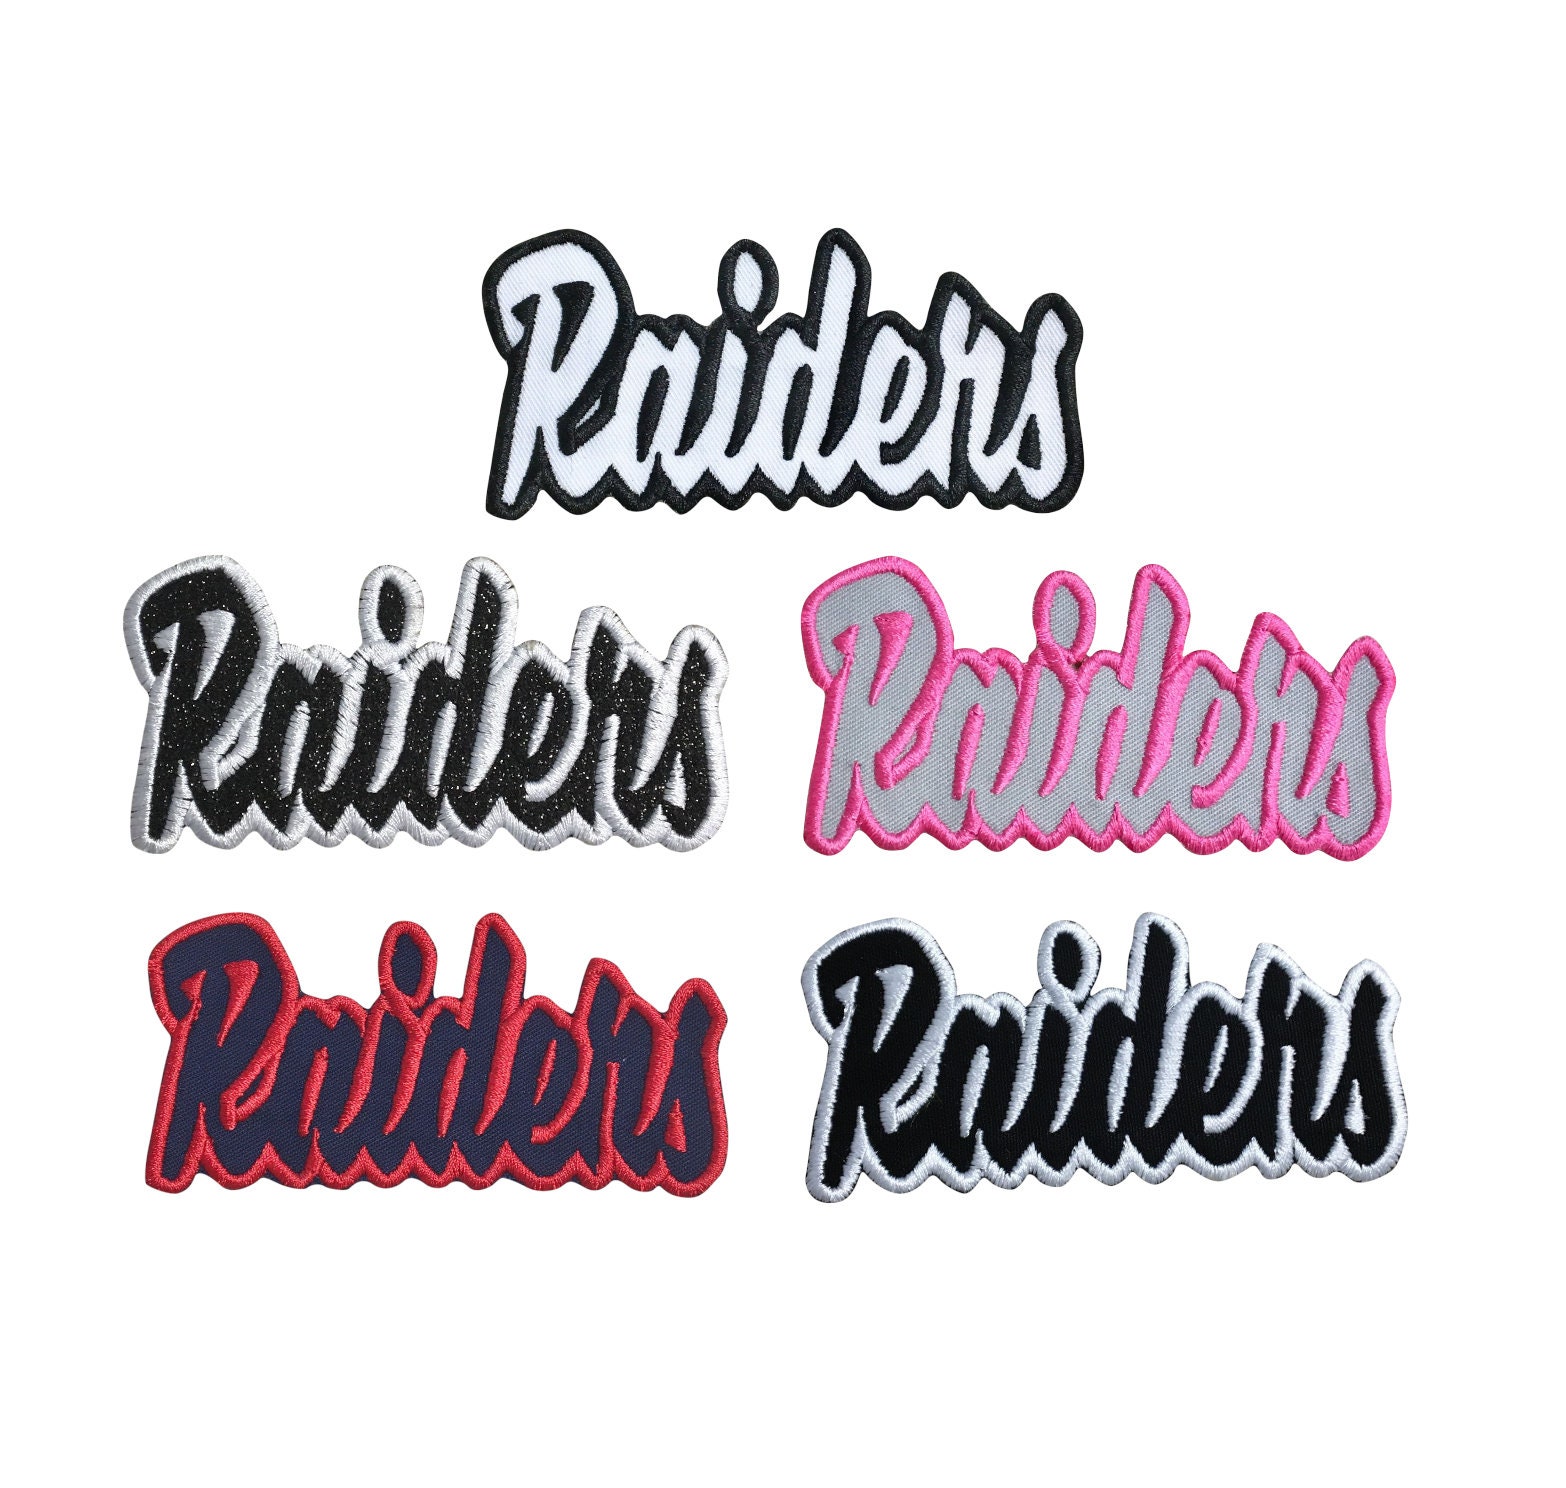 Raiders - Black/White - Team Mascot - Words/Names - Iron on  Applique/Embroidered Patch 